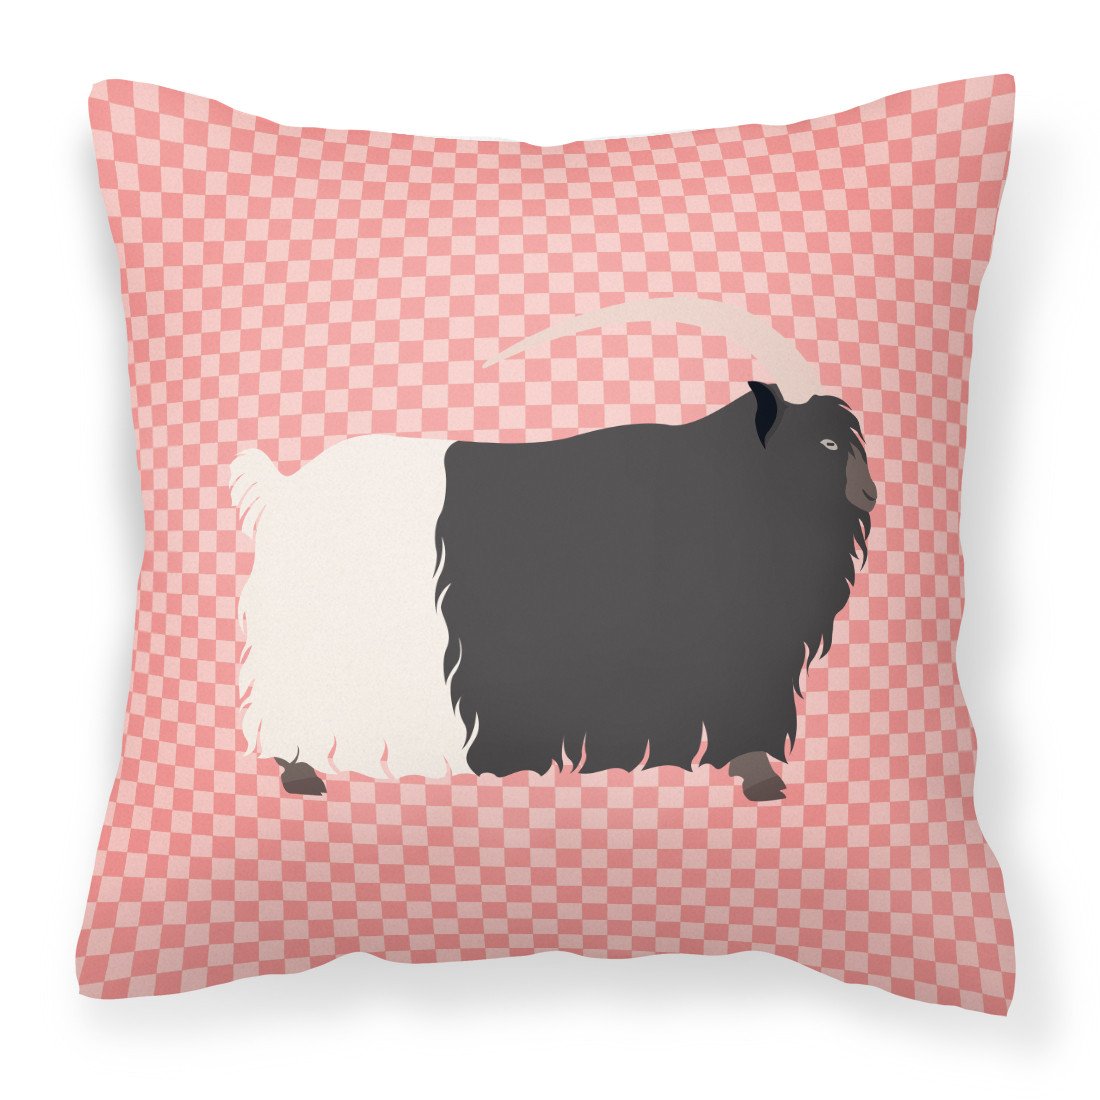 Welsh Black-Necked Goat Pink Check Fabric Decorative Pillow BB7887PW1818 by Caroline's Treasures